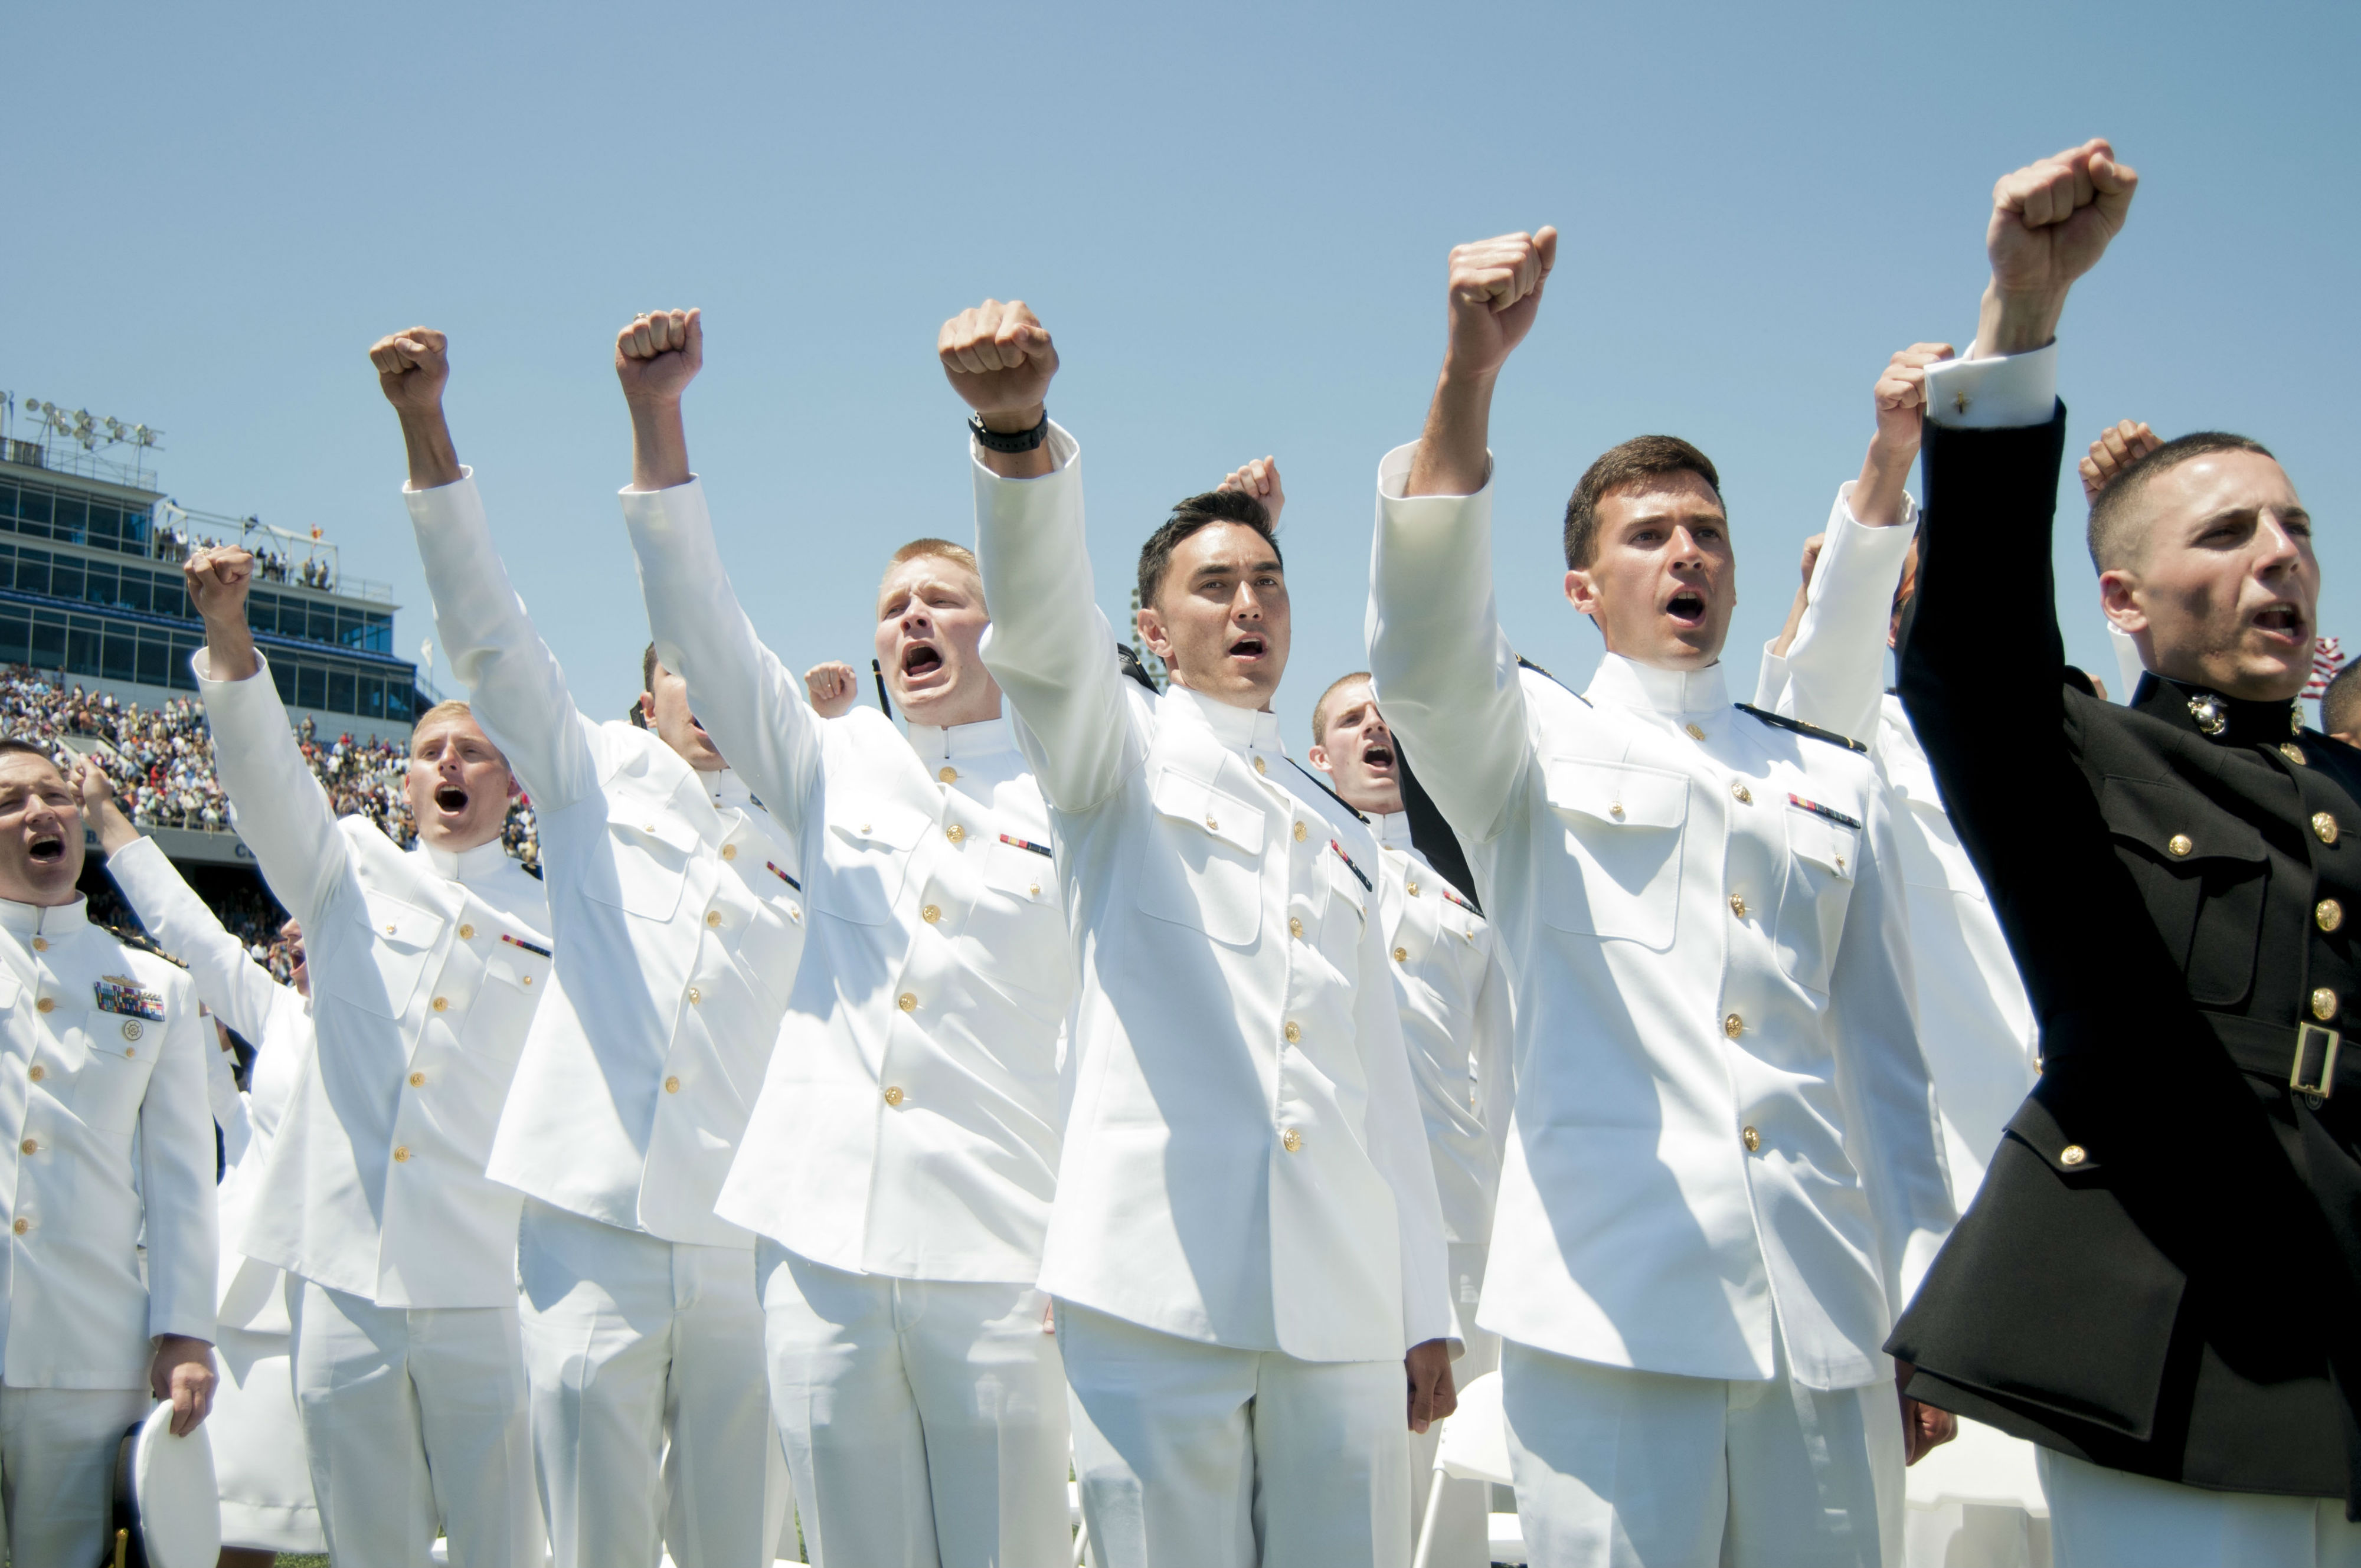 Scenes from the Naval Academy graduation